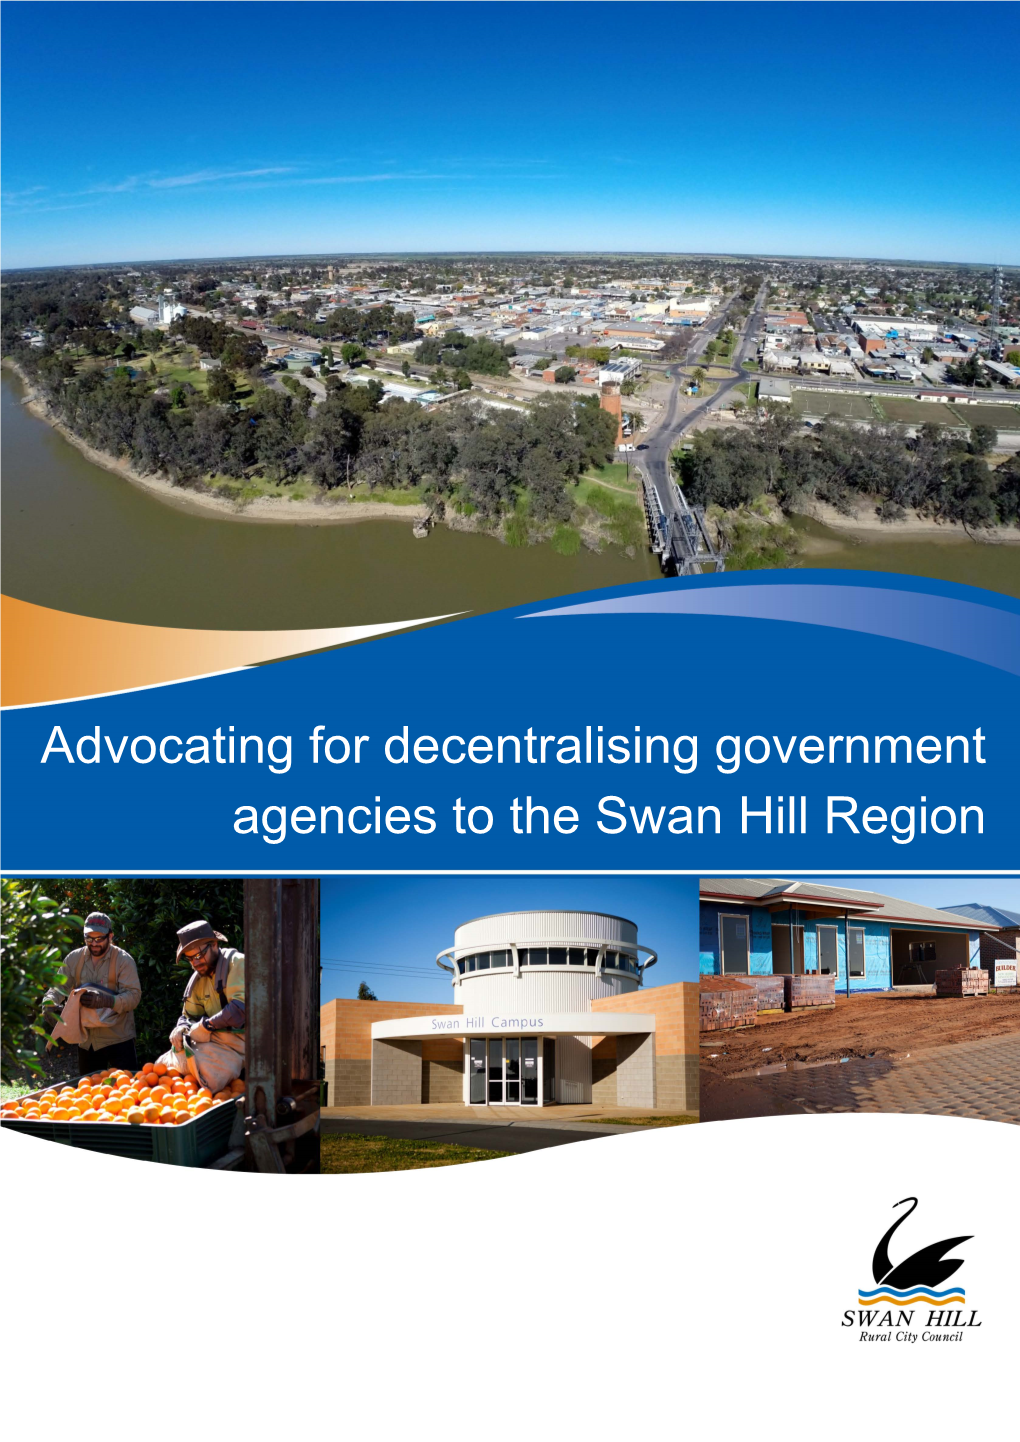 Advocating for Decentralising Government Agencies to the Swan Hill Region